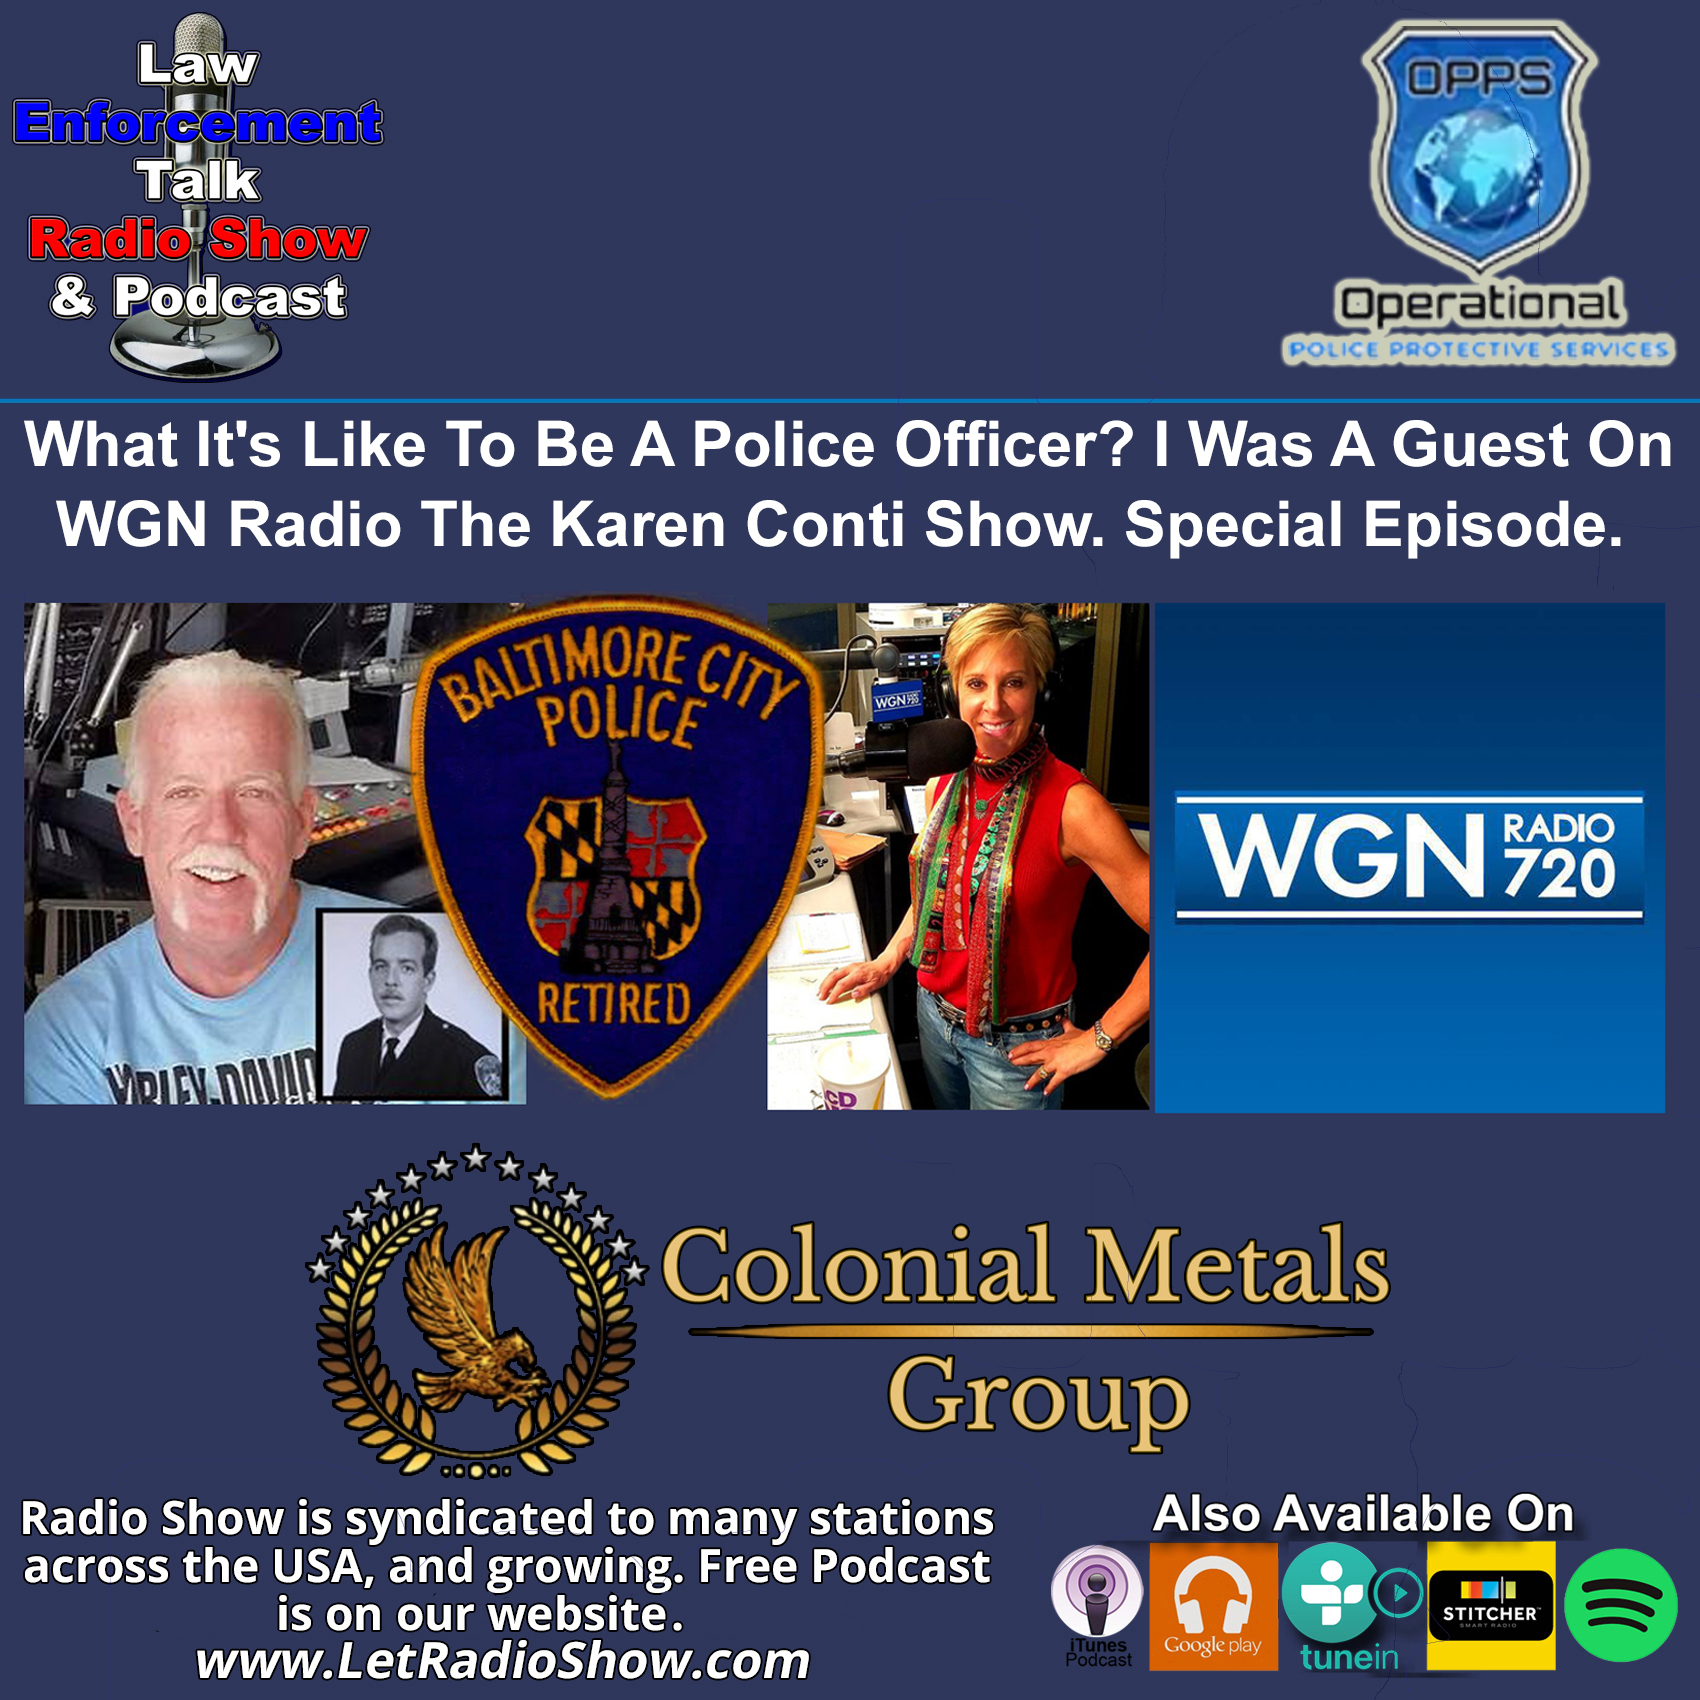 What It’s Like To Be A Police Officer. I Was a Guest on WGN Radio,  Karen Conti Show. Special Episode.